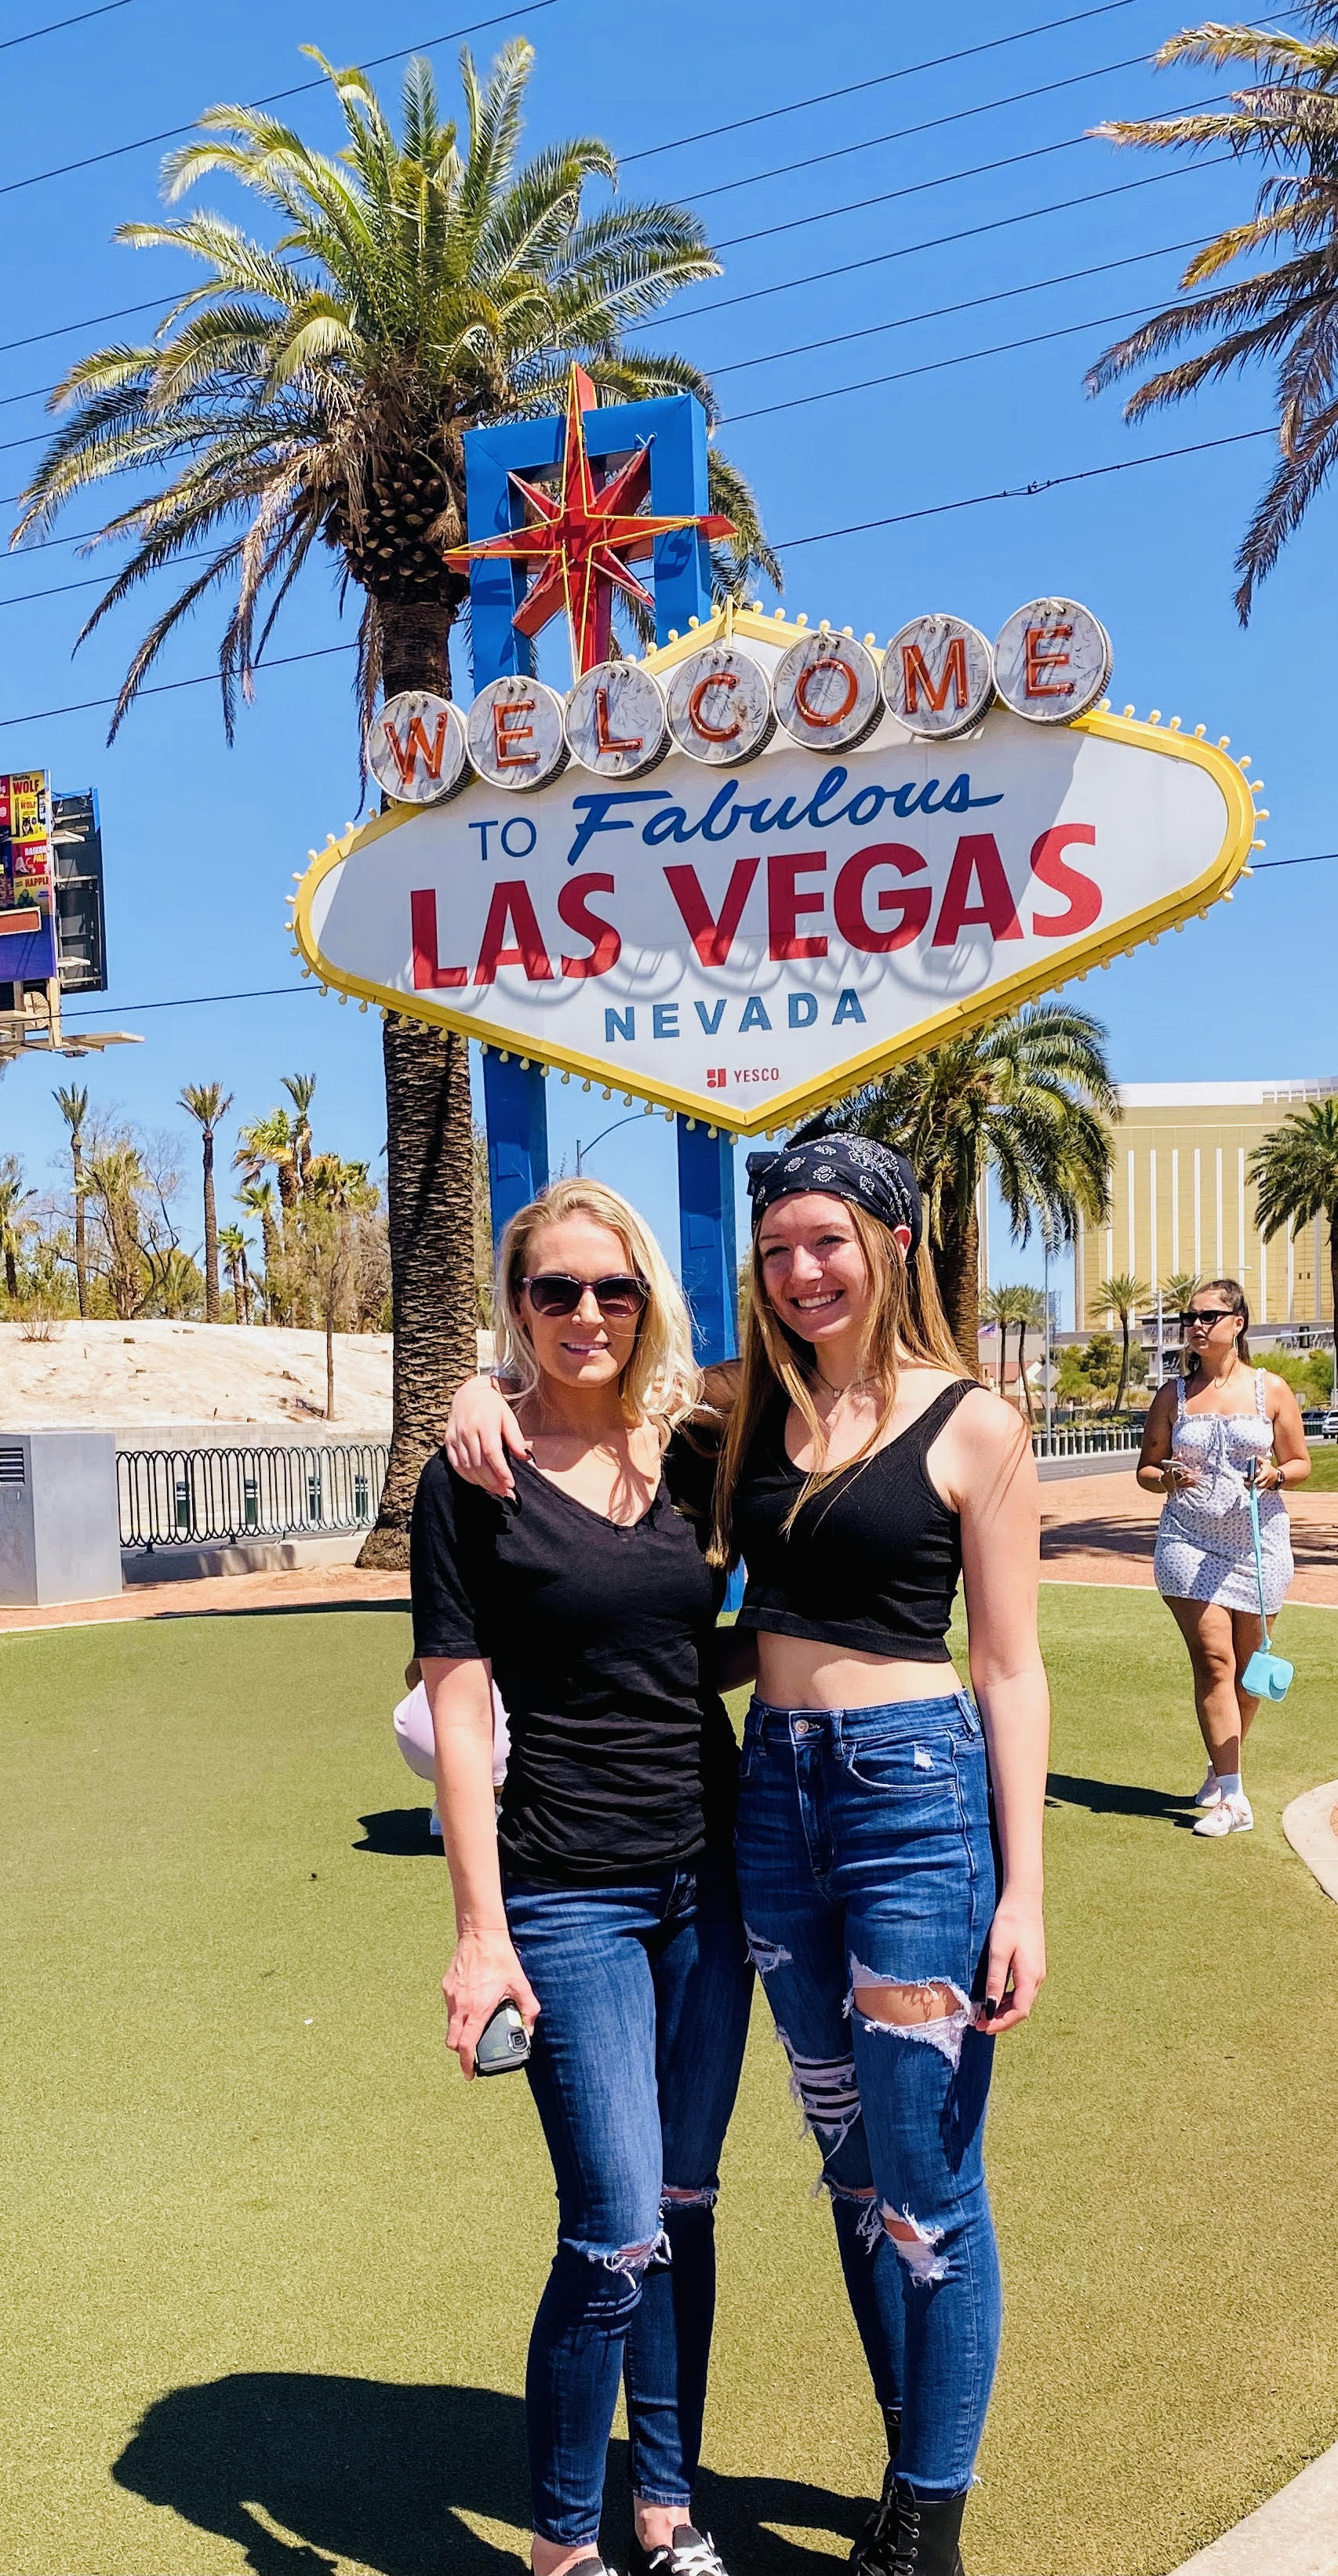 Of course, one of the best things to do in Las Vegas and where you should start your journey is the Las Vegas sign on Las Vegas BLVD